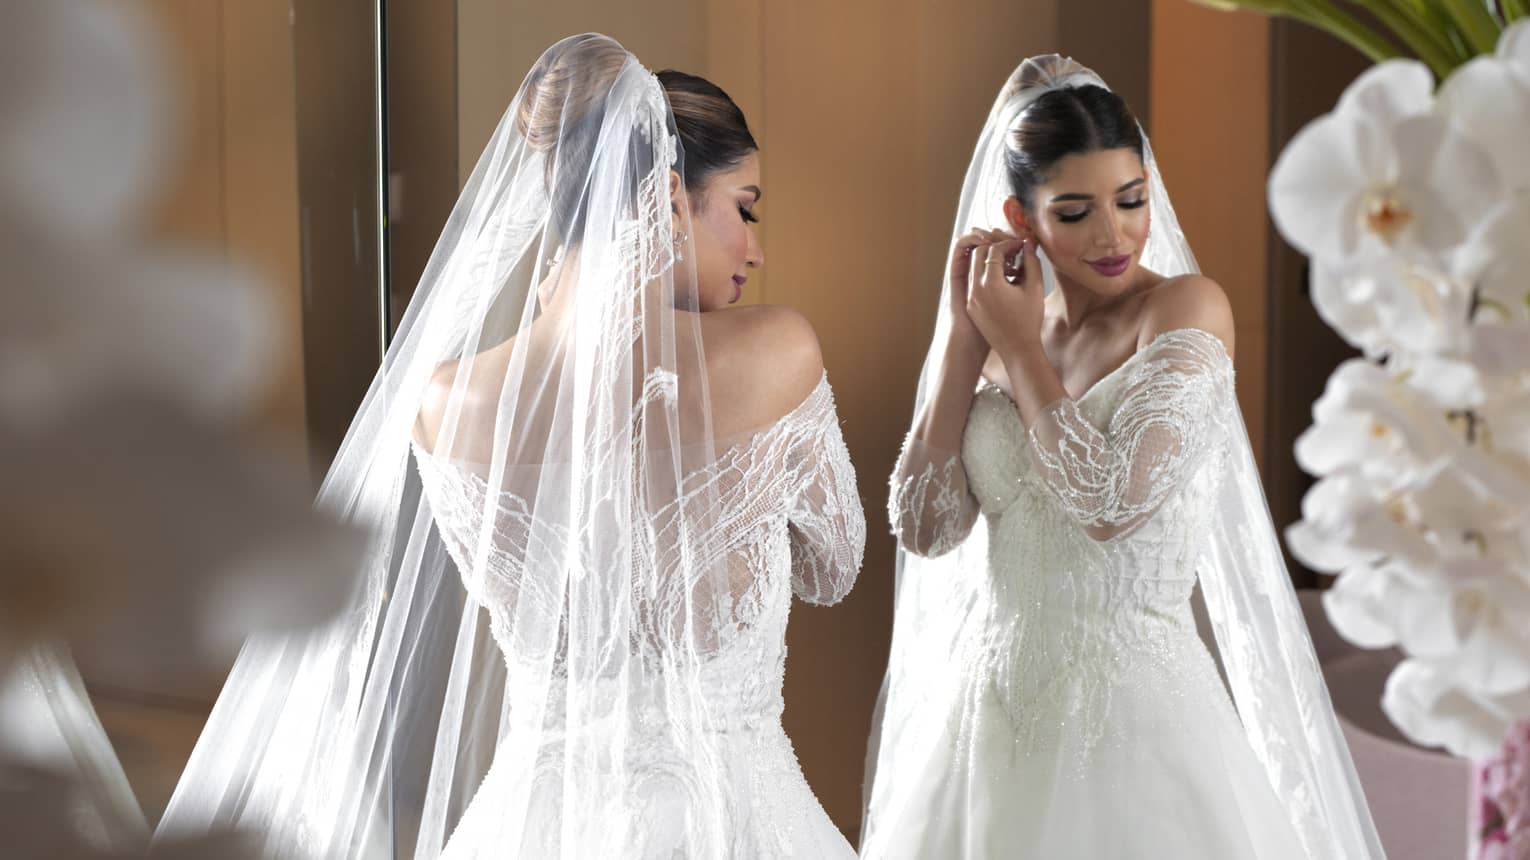 A bride in a white dress adjusting her earring in a mirror